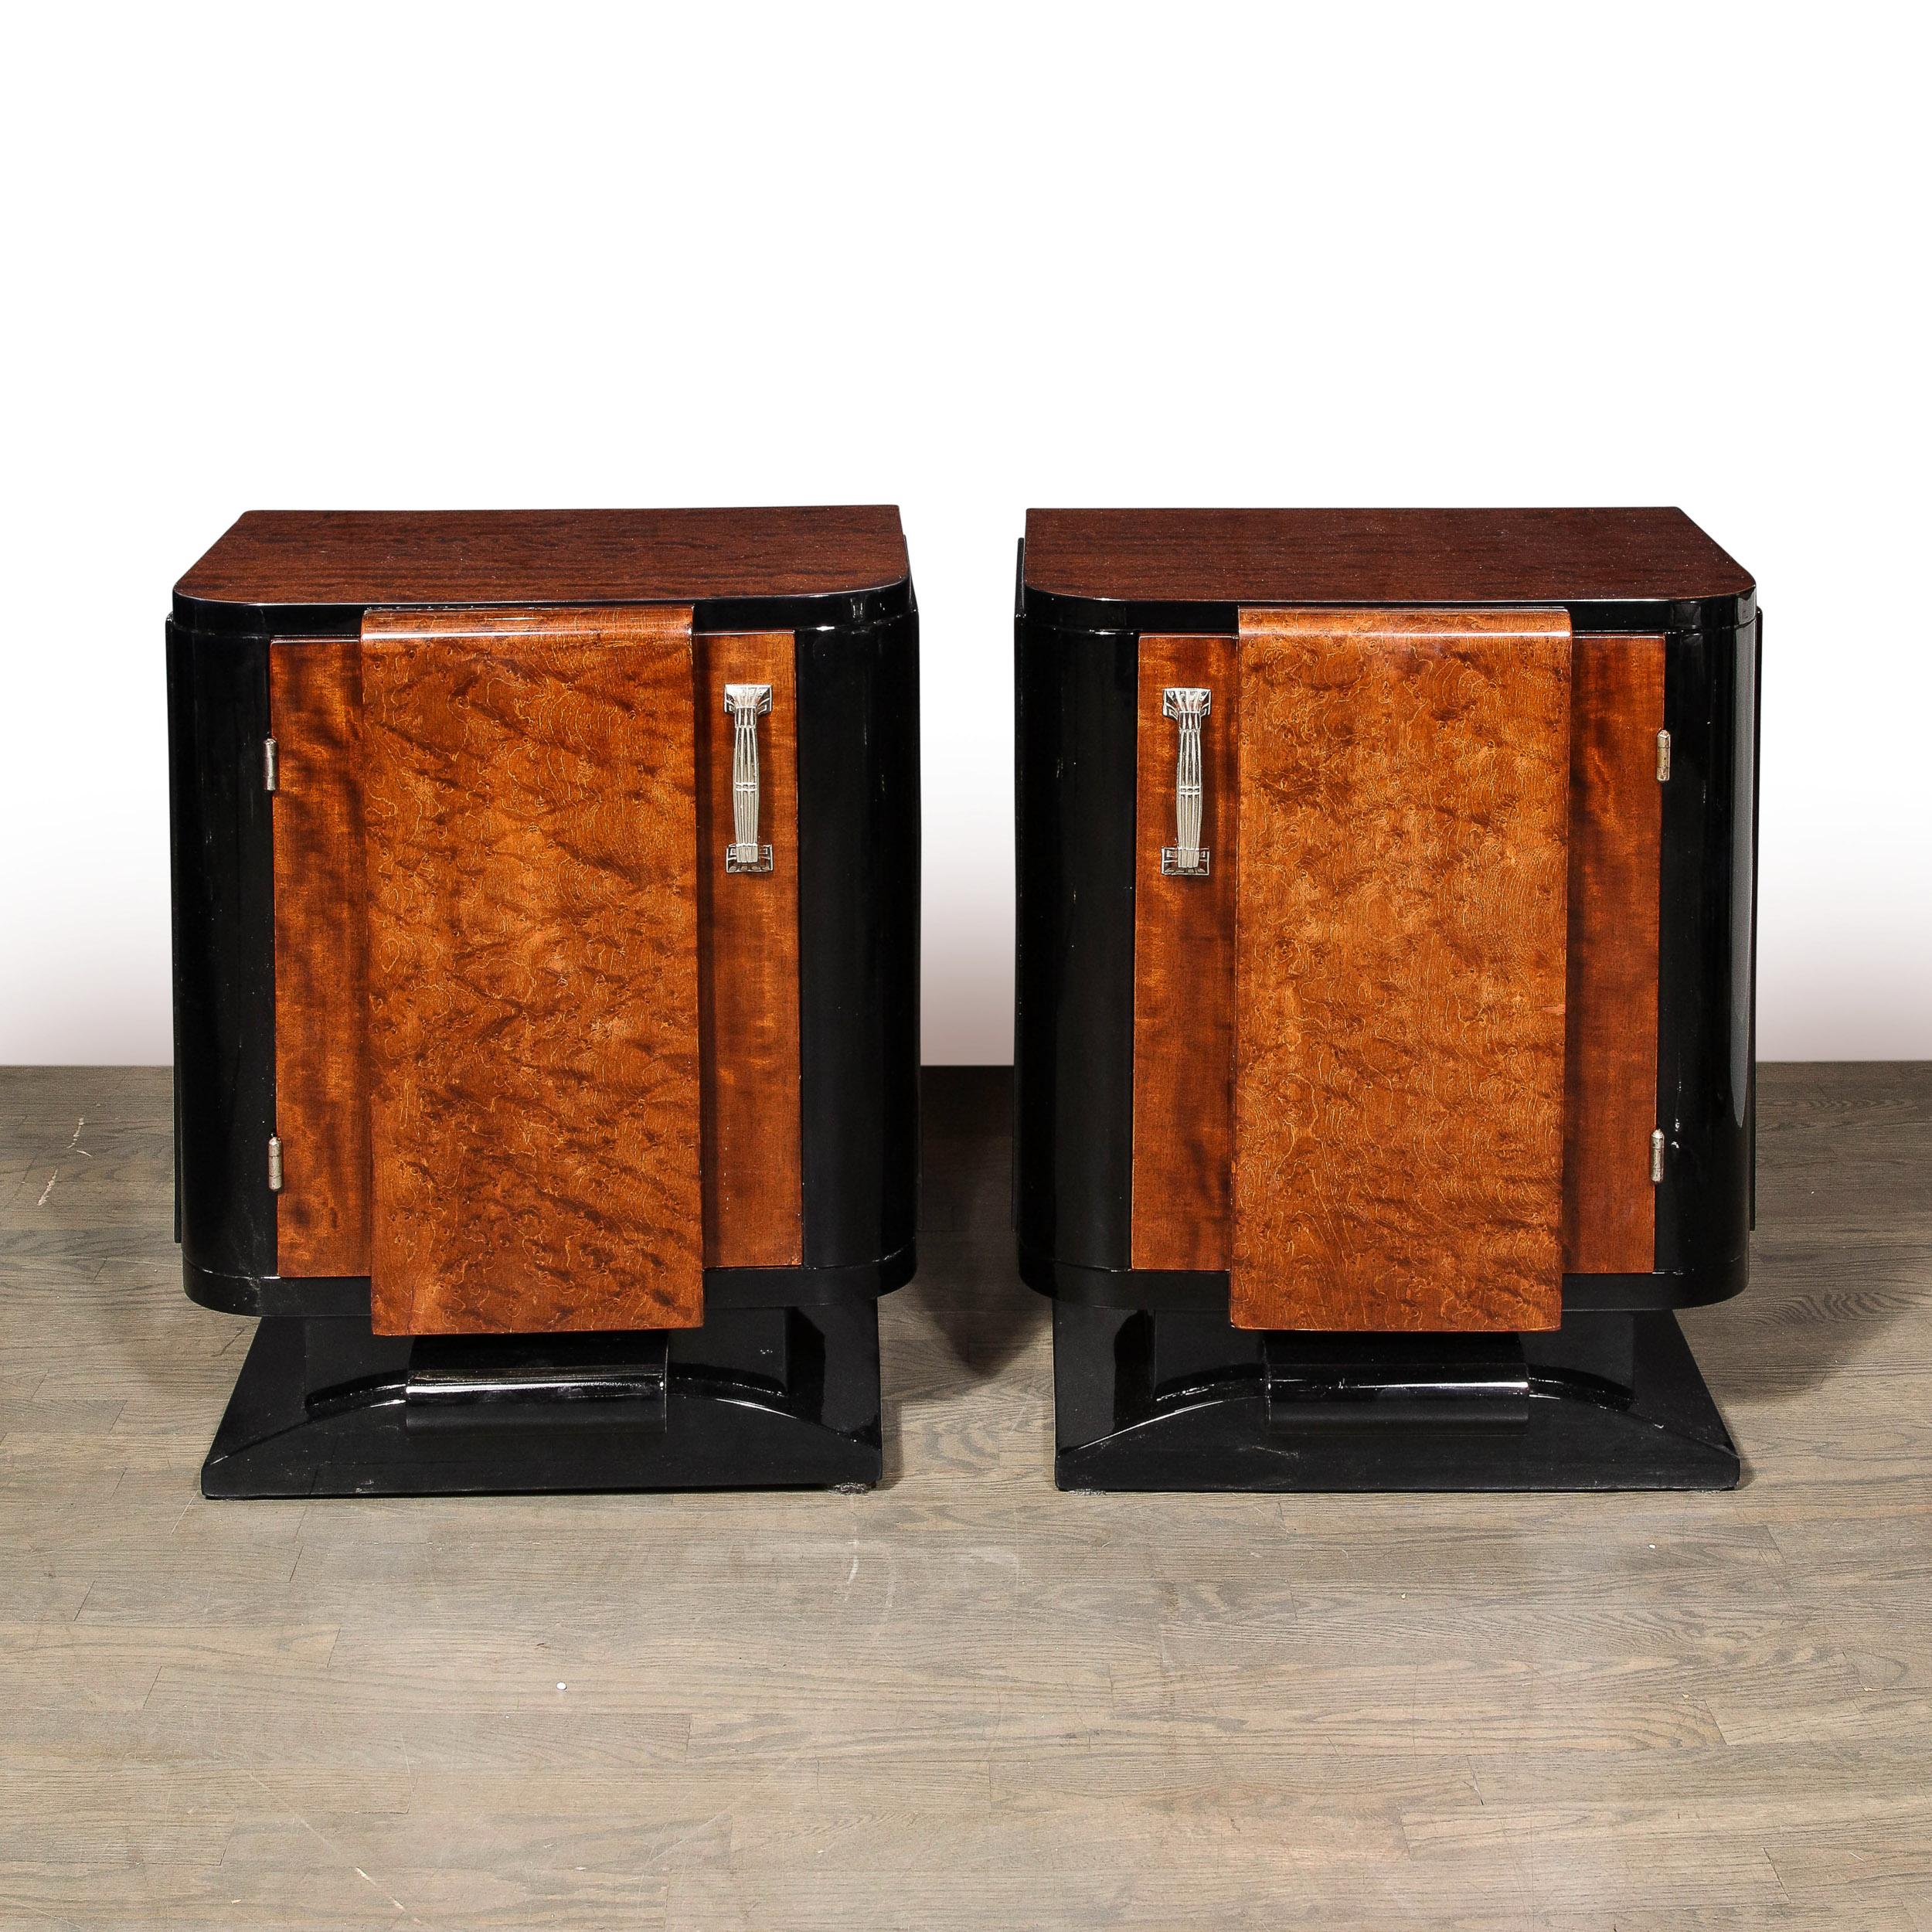 This stunning pair of Art Deco Machine Age nightstands were realized in France circa 1935. They feature streamlined bases with a banded detail in the center- all in lustrous black lacquer. The center offers a streamlined rectangular form floating on